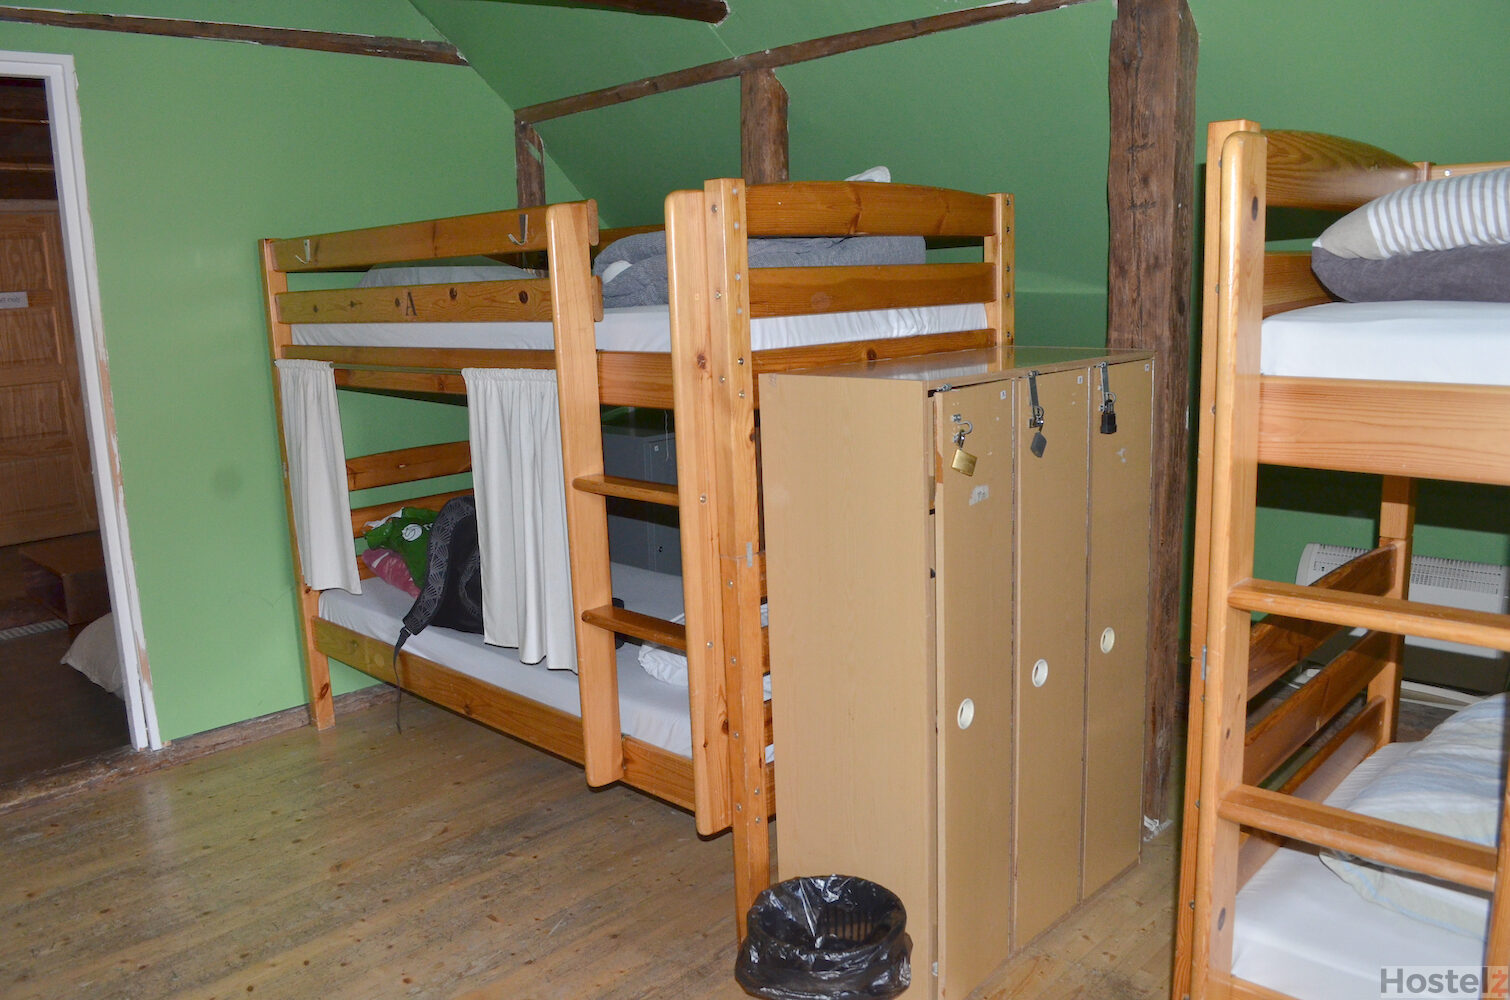 Lockers and bunkn beds in the dorm room in the hostel